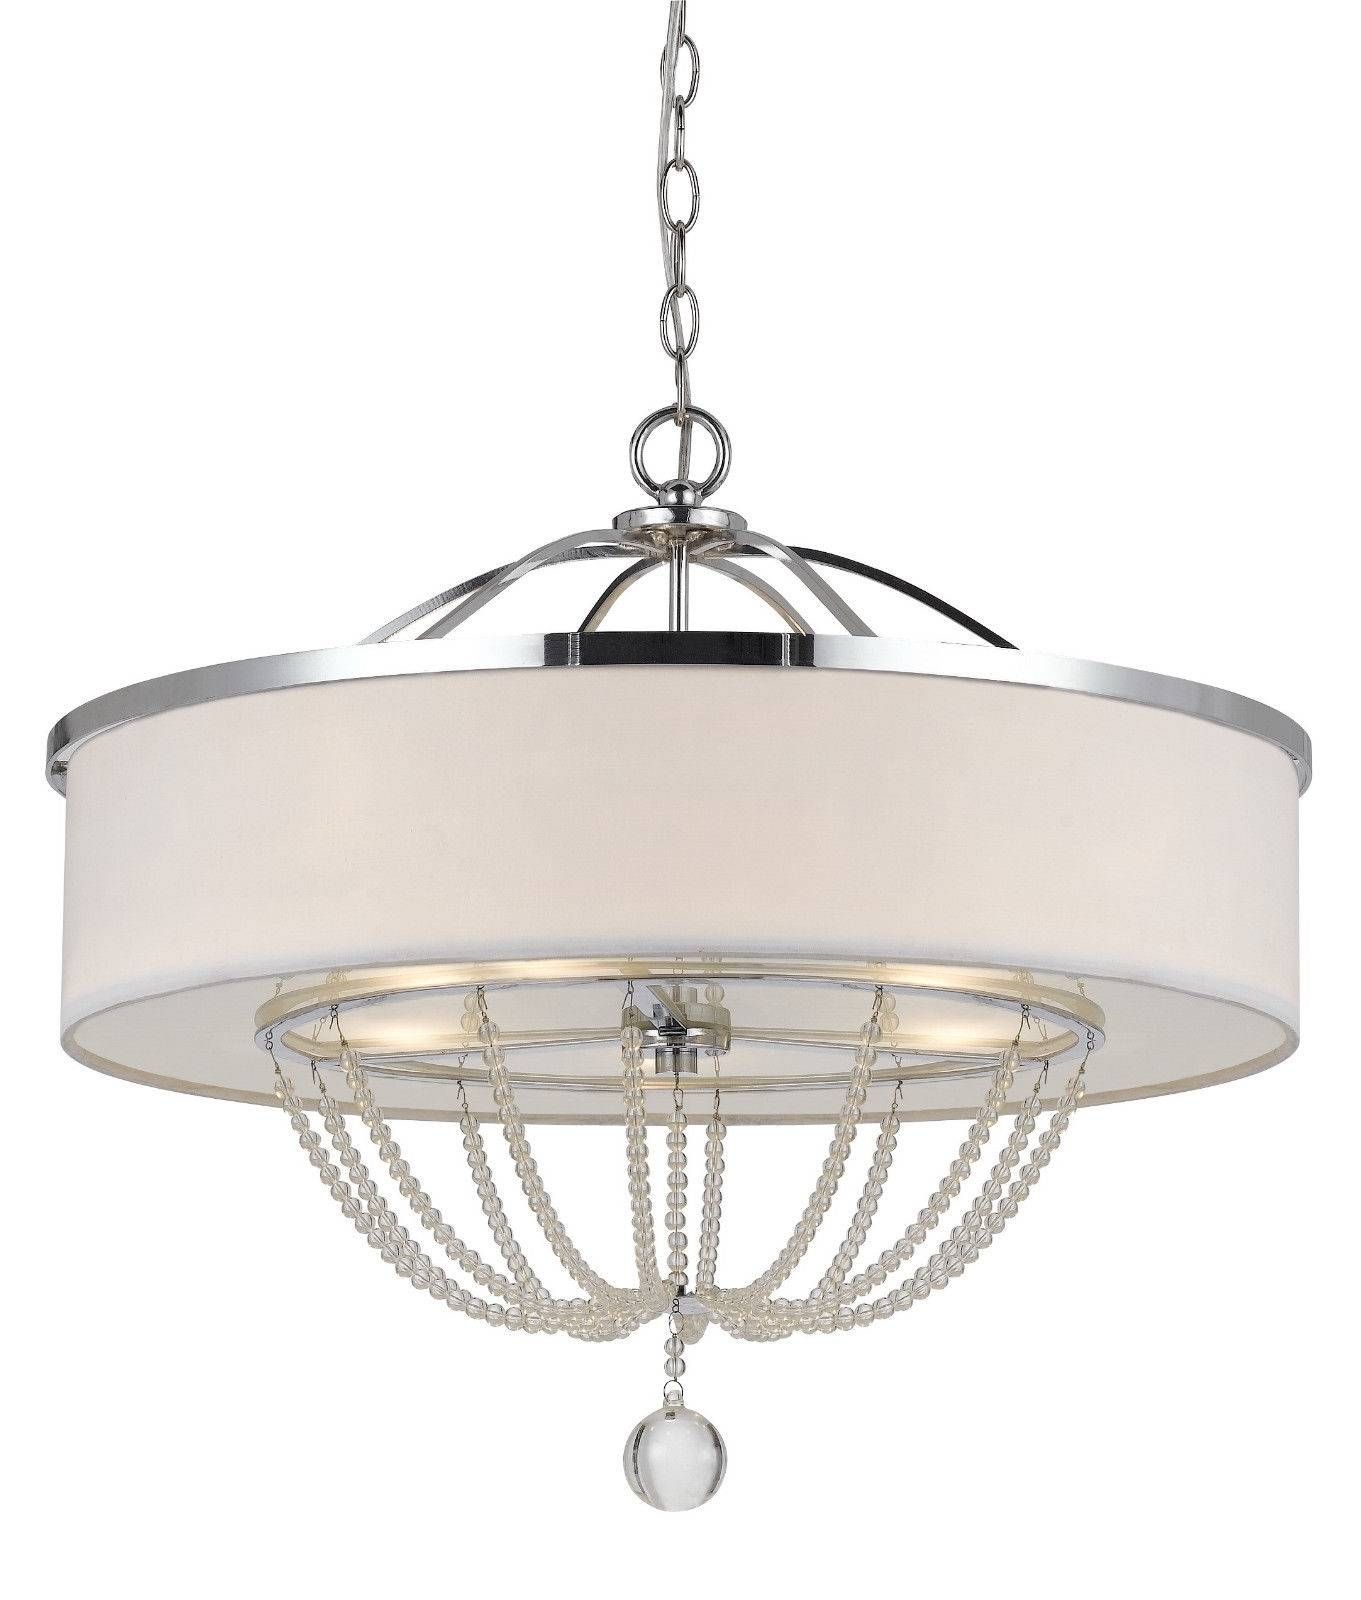 White Modern Chandelier | Chandelier Models Throughout White Drum Lights Fixtures (Photo 7 of 15)